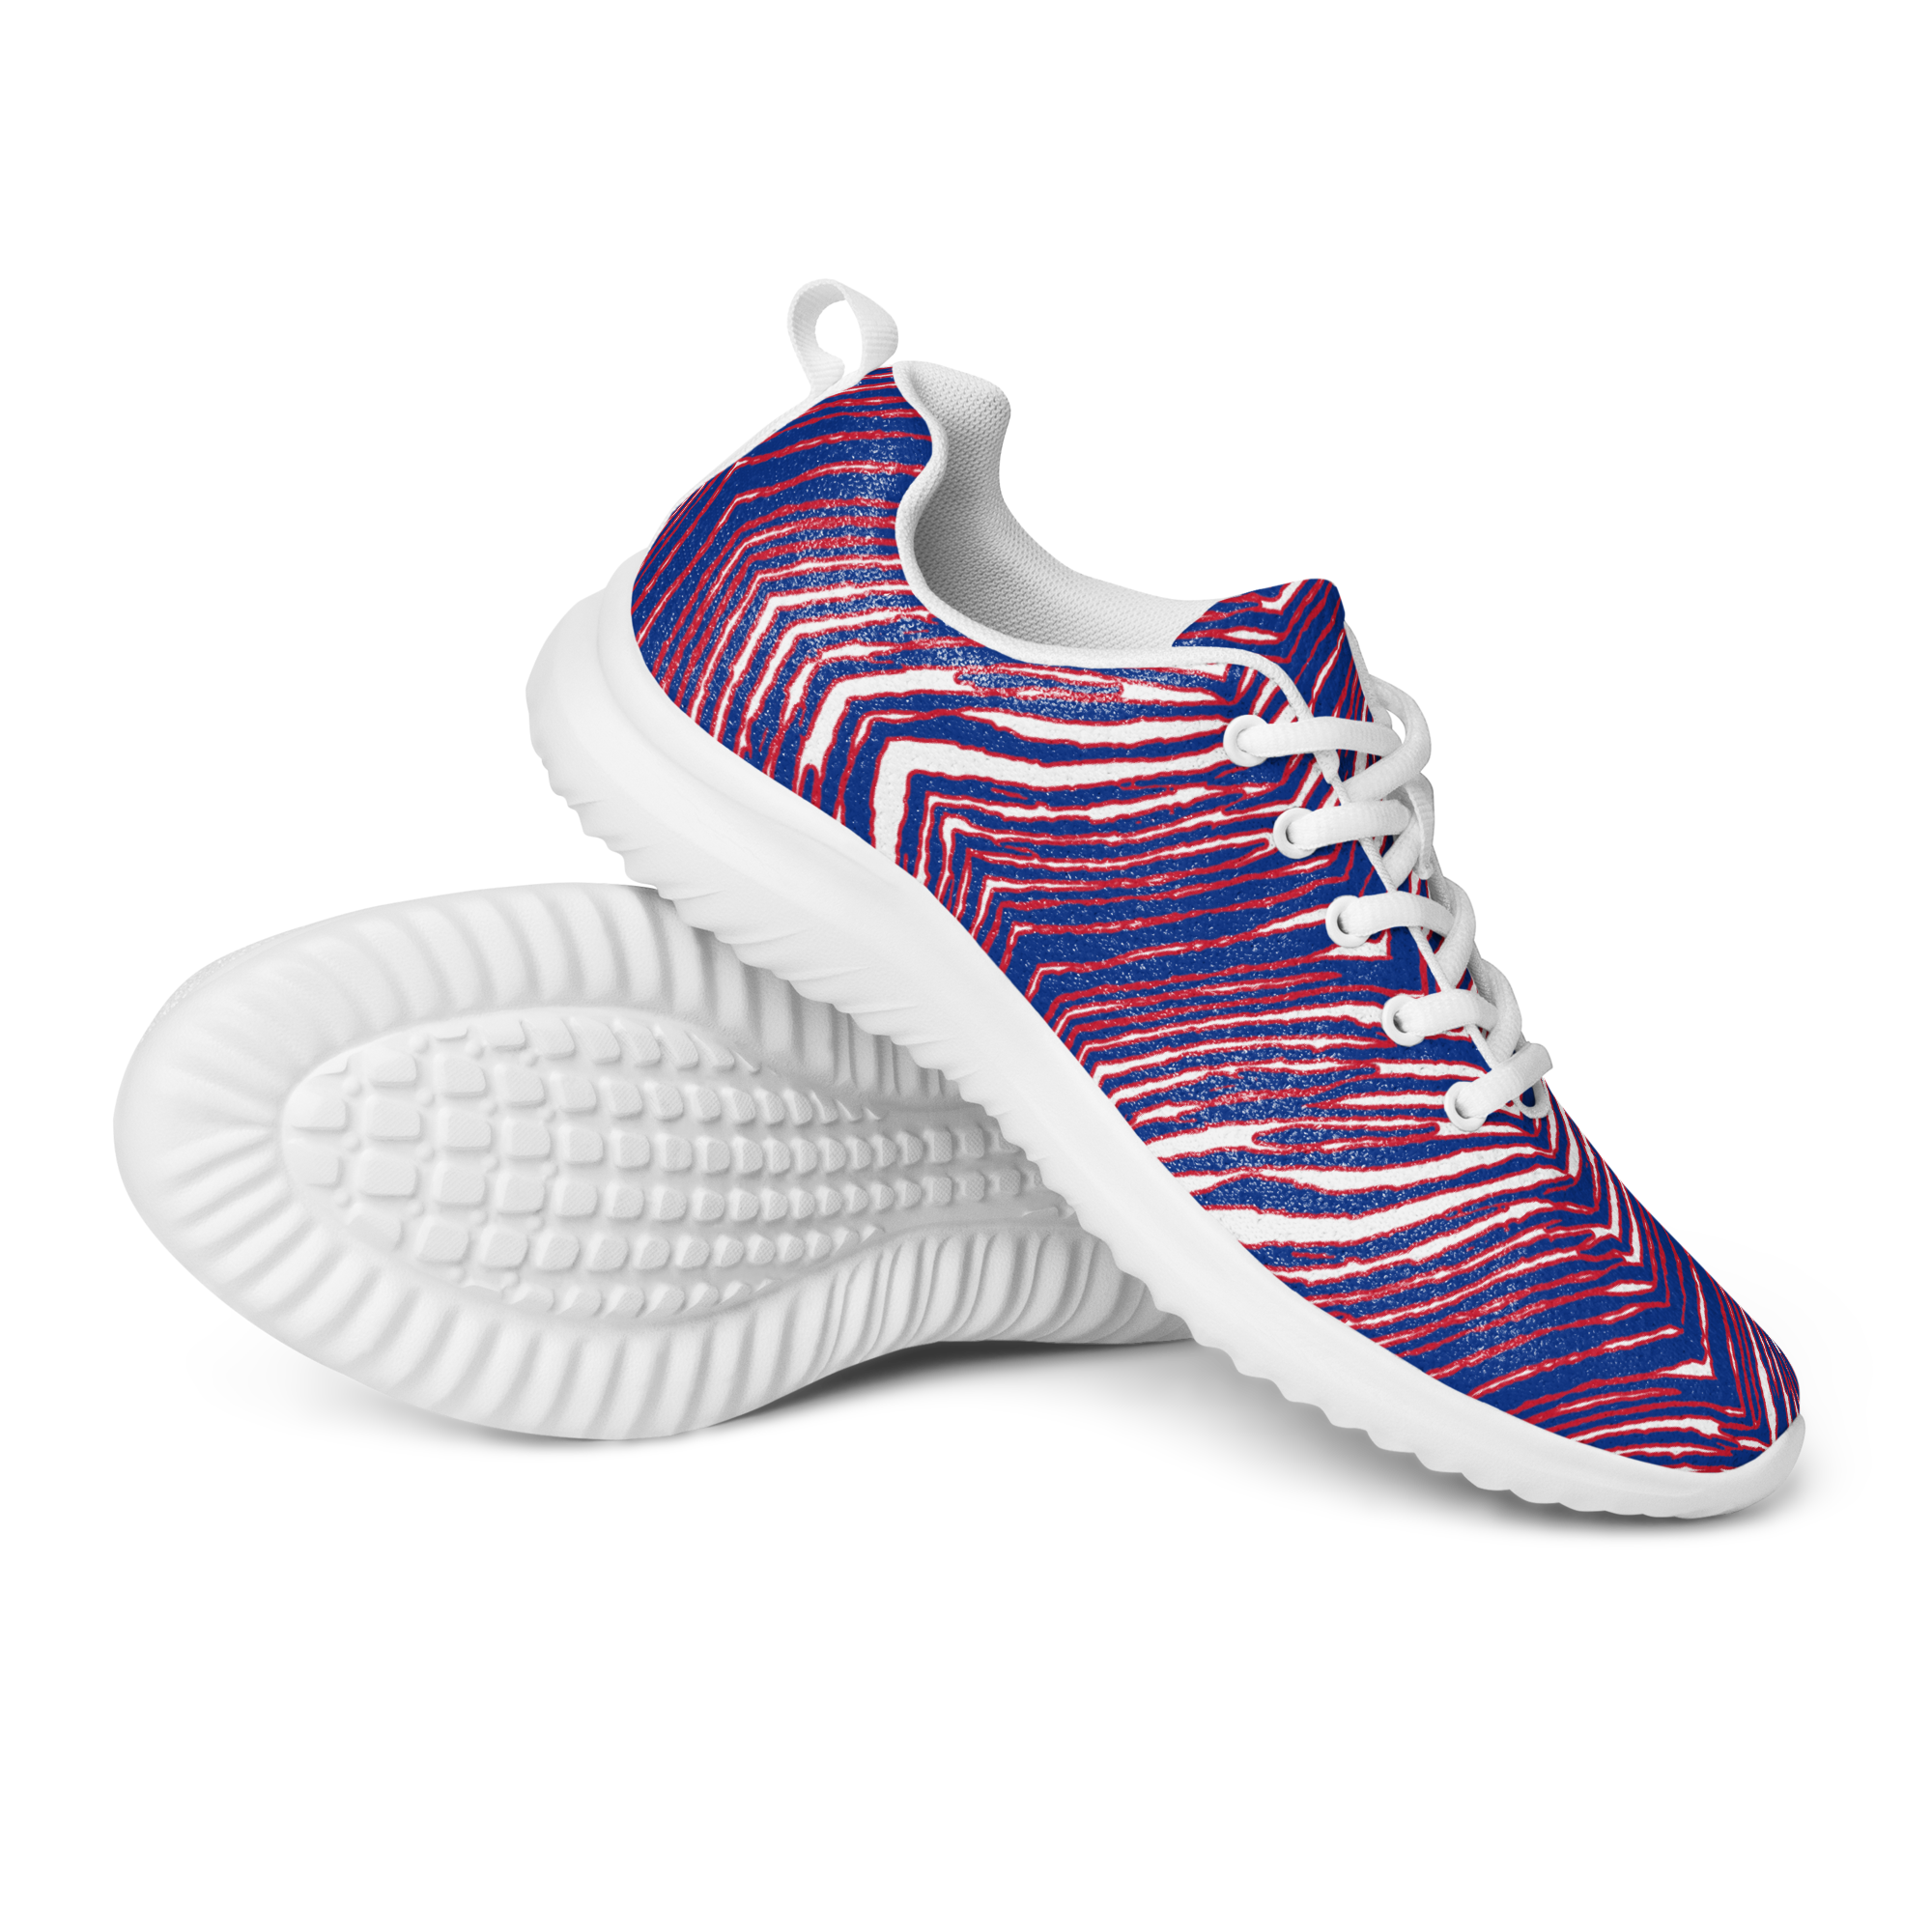 MAFIA Gear: Officially Licensed Zubaz Men's Athletic Shoes – 26 Shirts